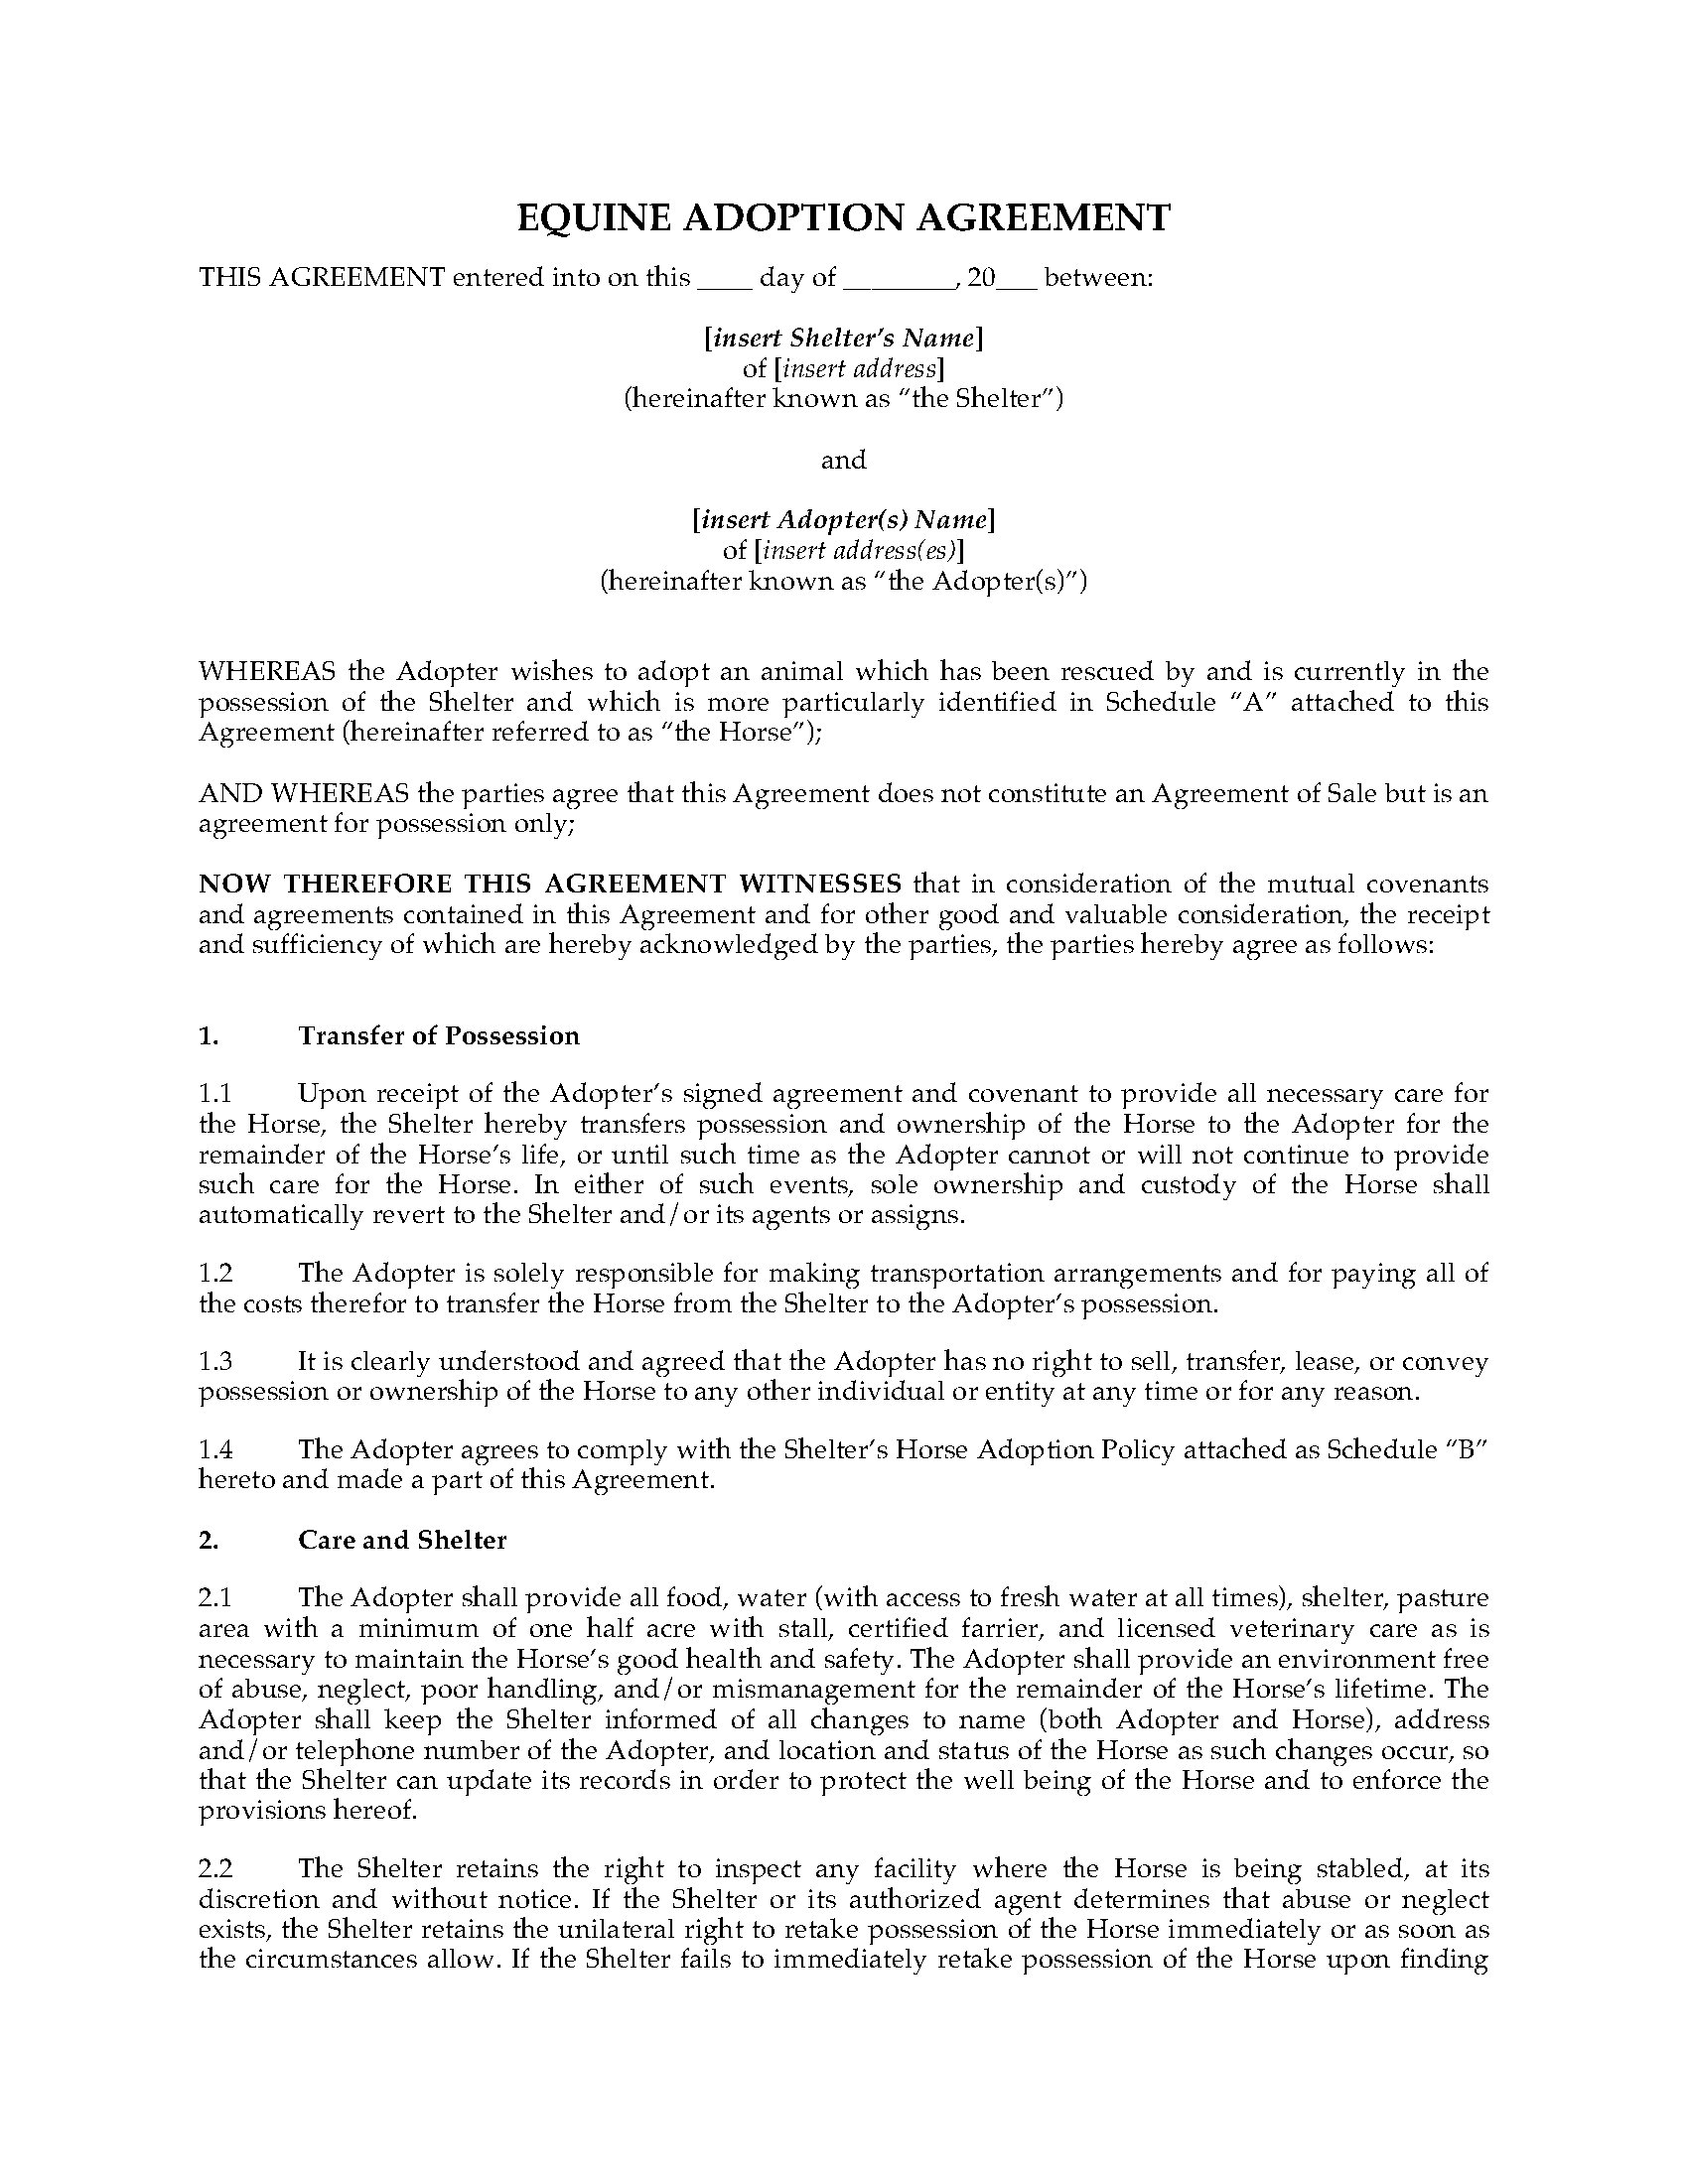 equine-adoption-agreement-legal-forms-and-business-templates